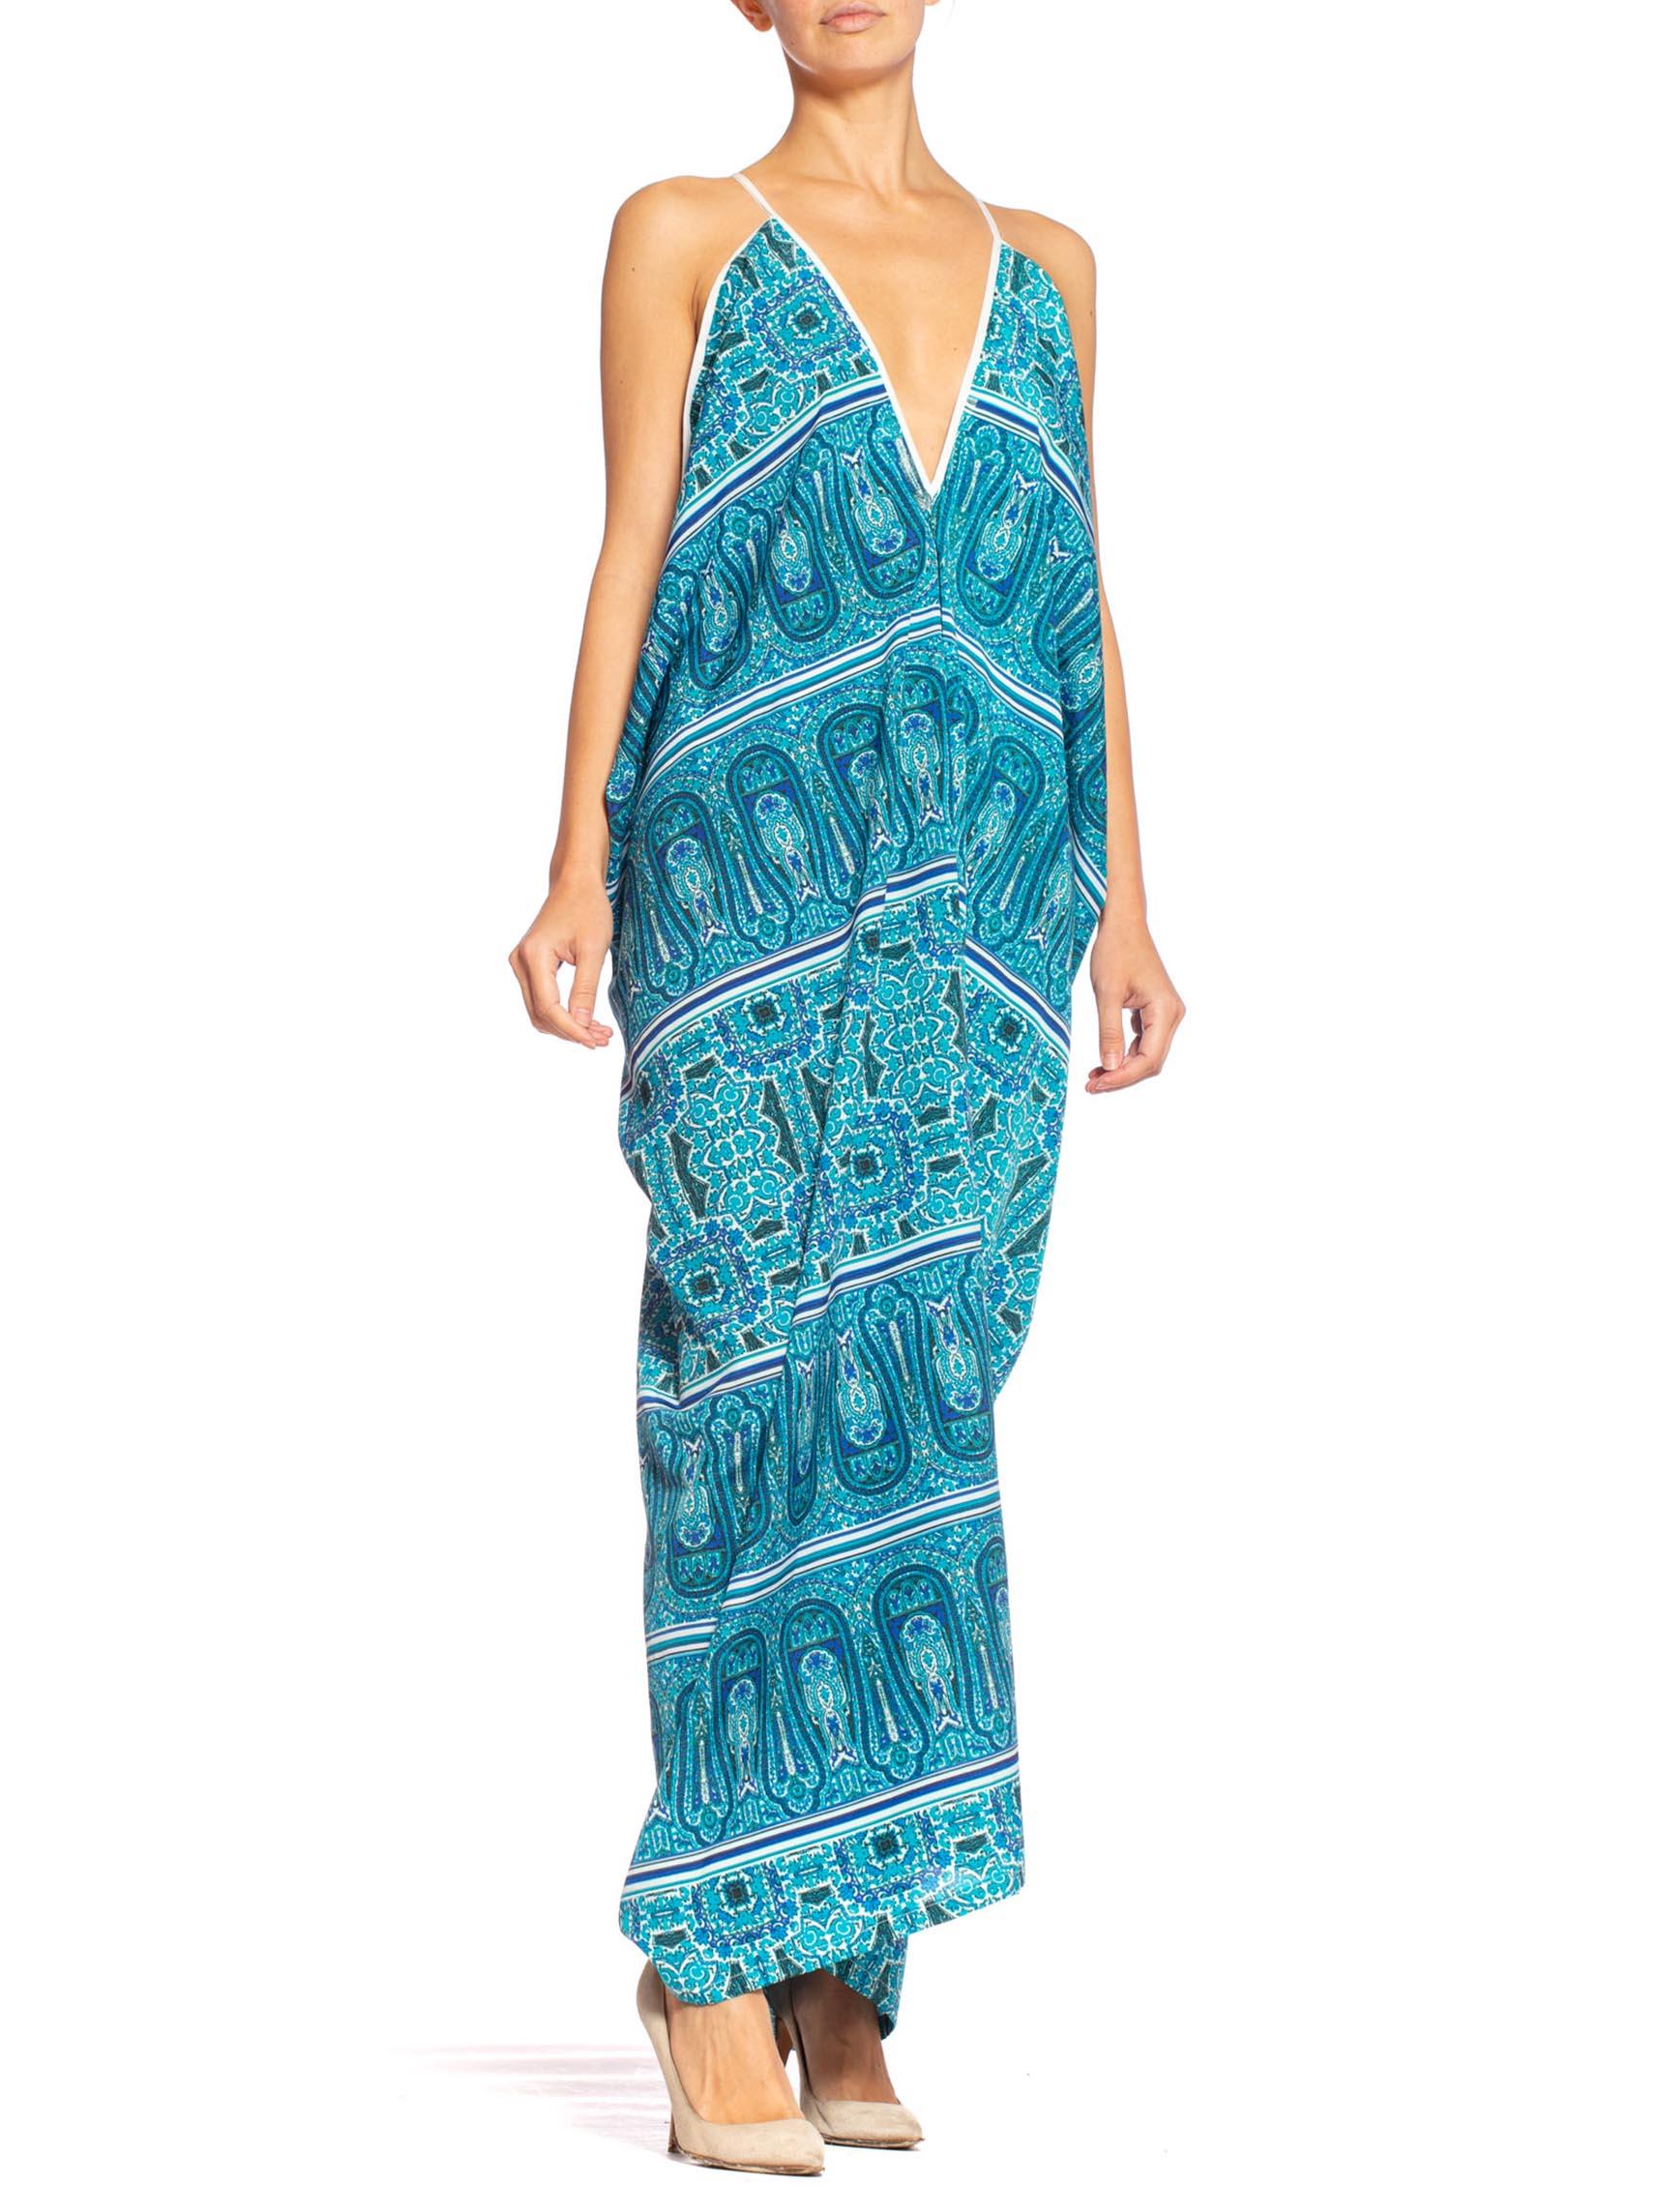 MORPHEW COLLECTION Teal Paisley Poly Blend Easy Breezy Everbody Maxi Dress Made From Deadstock Fabric